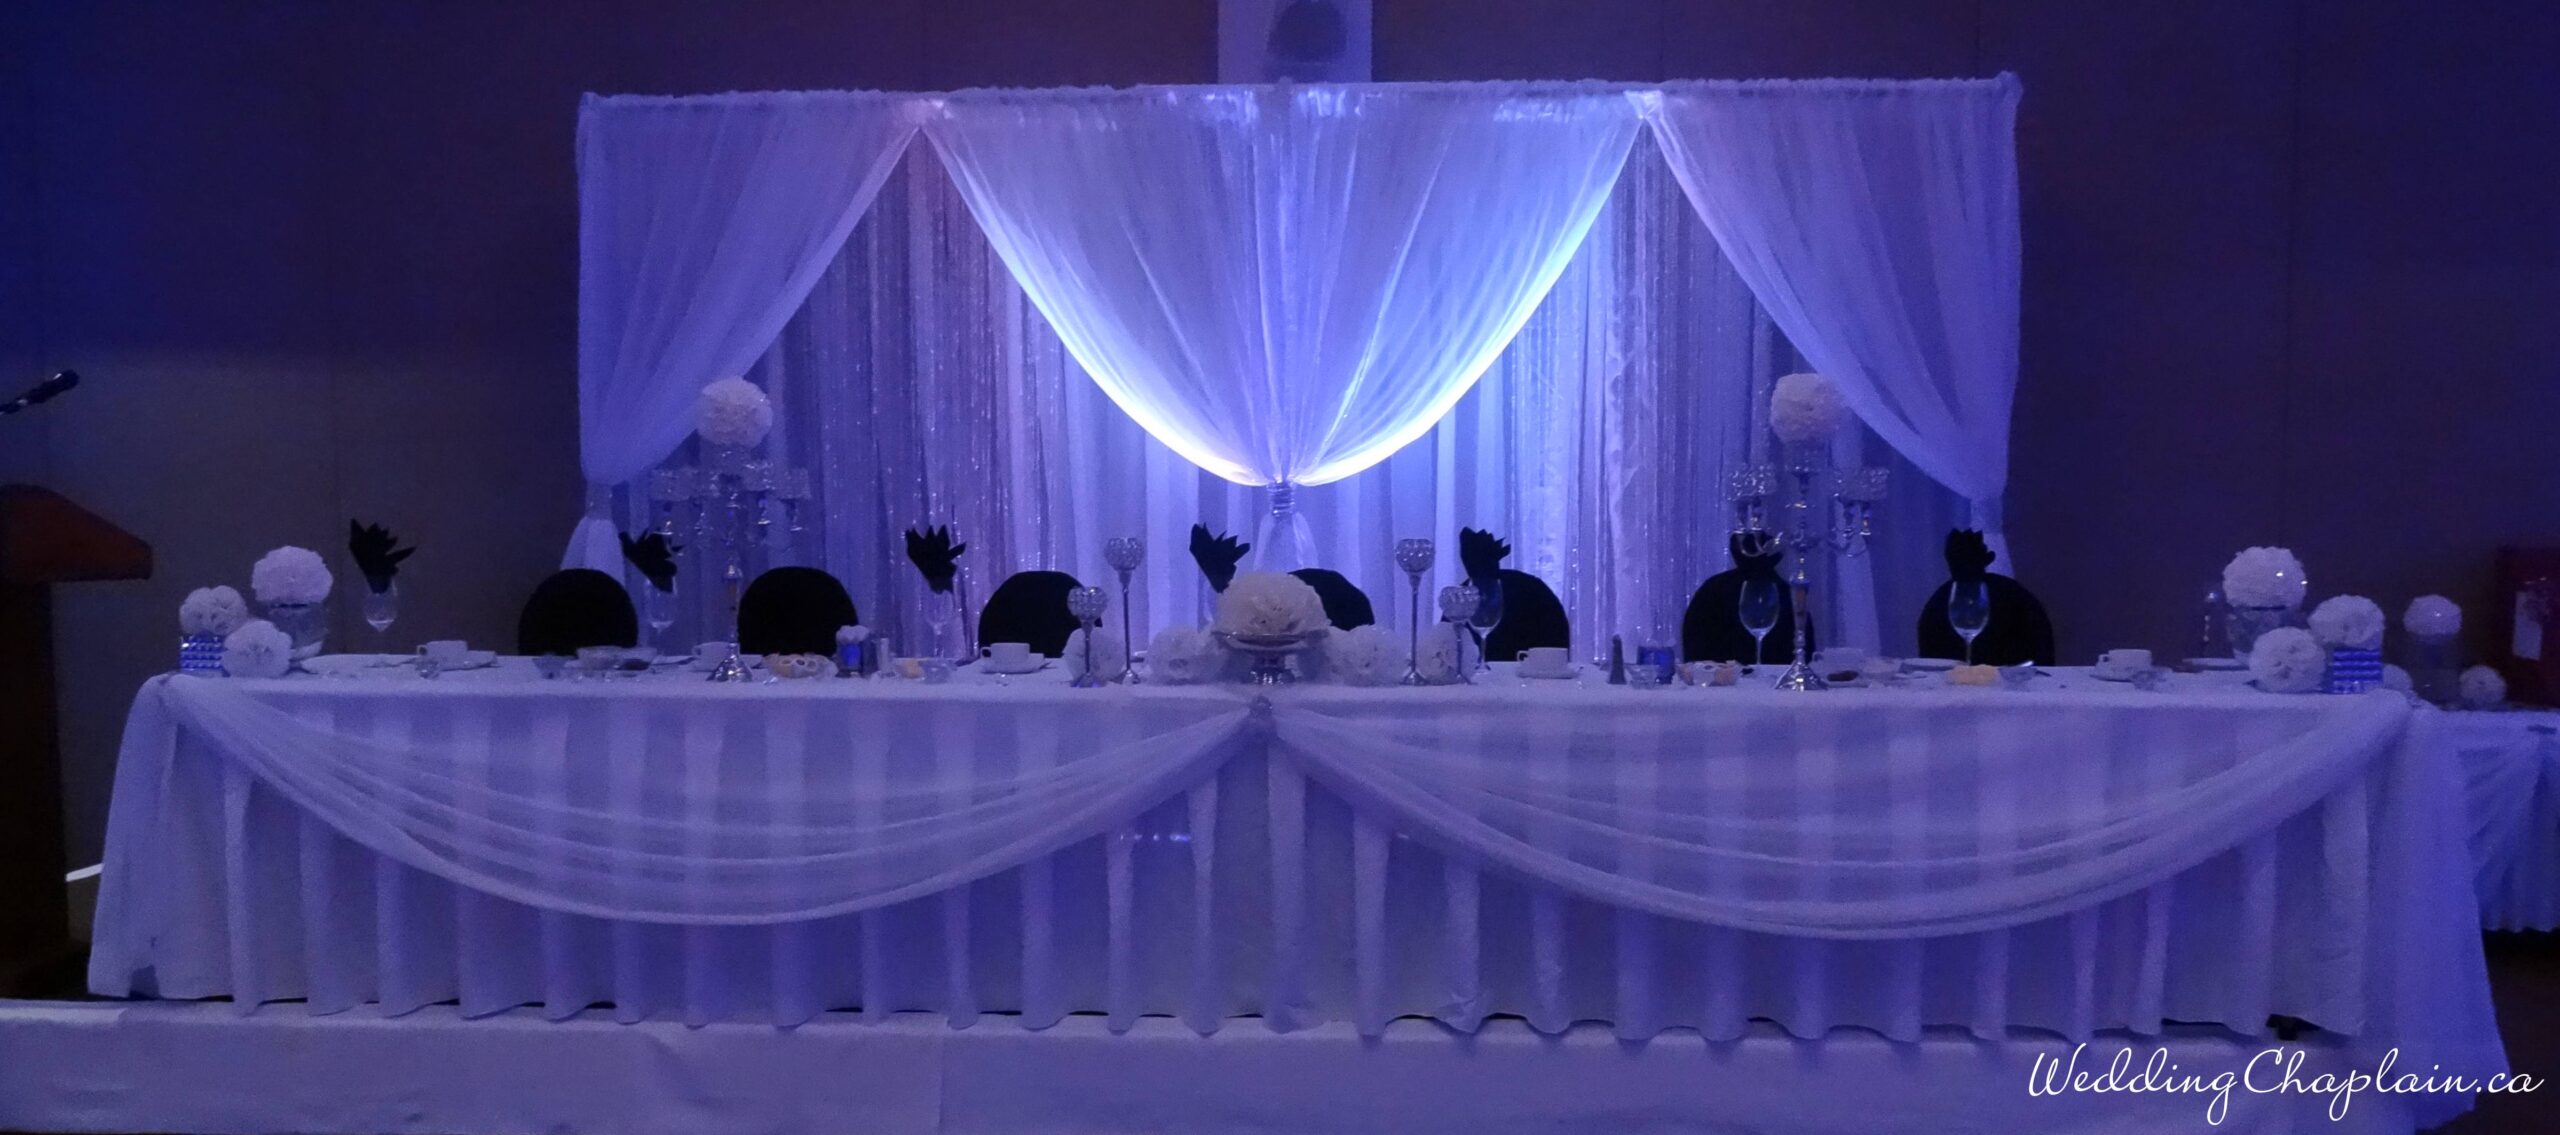 Reception Scaled - Your Wedding Ceremony Decor Sets The Mood 2024